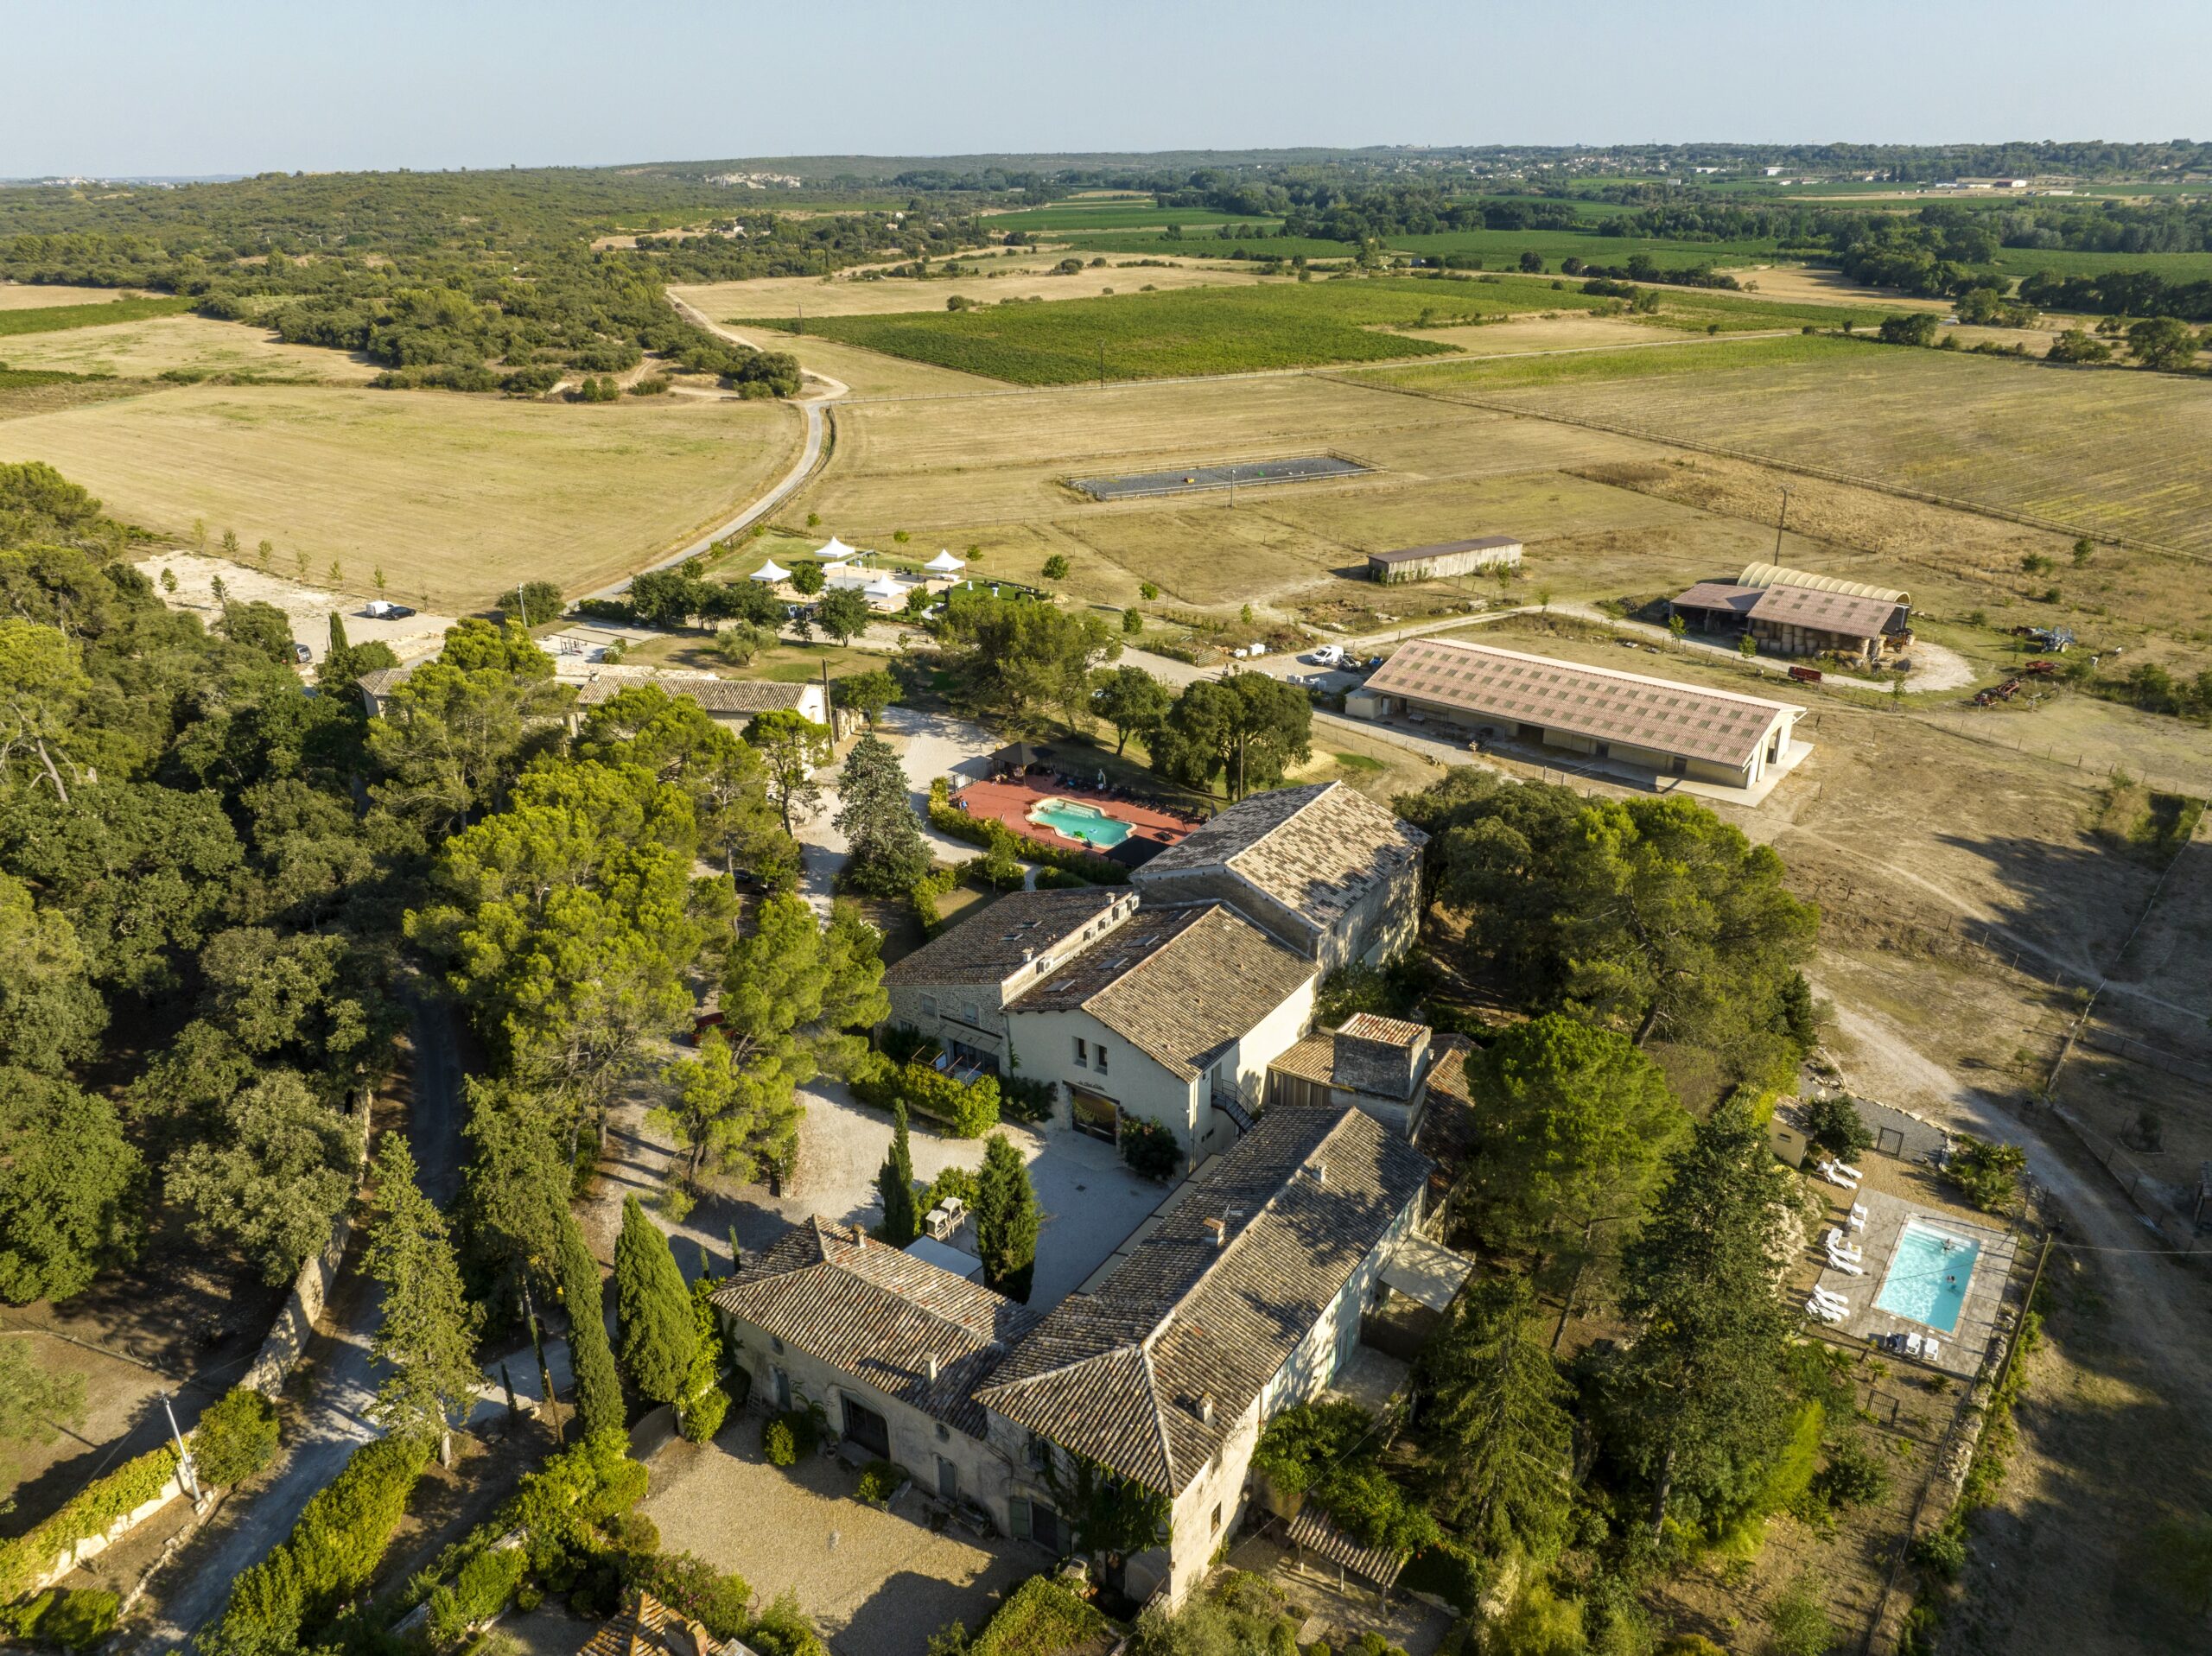 The property seen from the sky